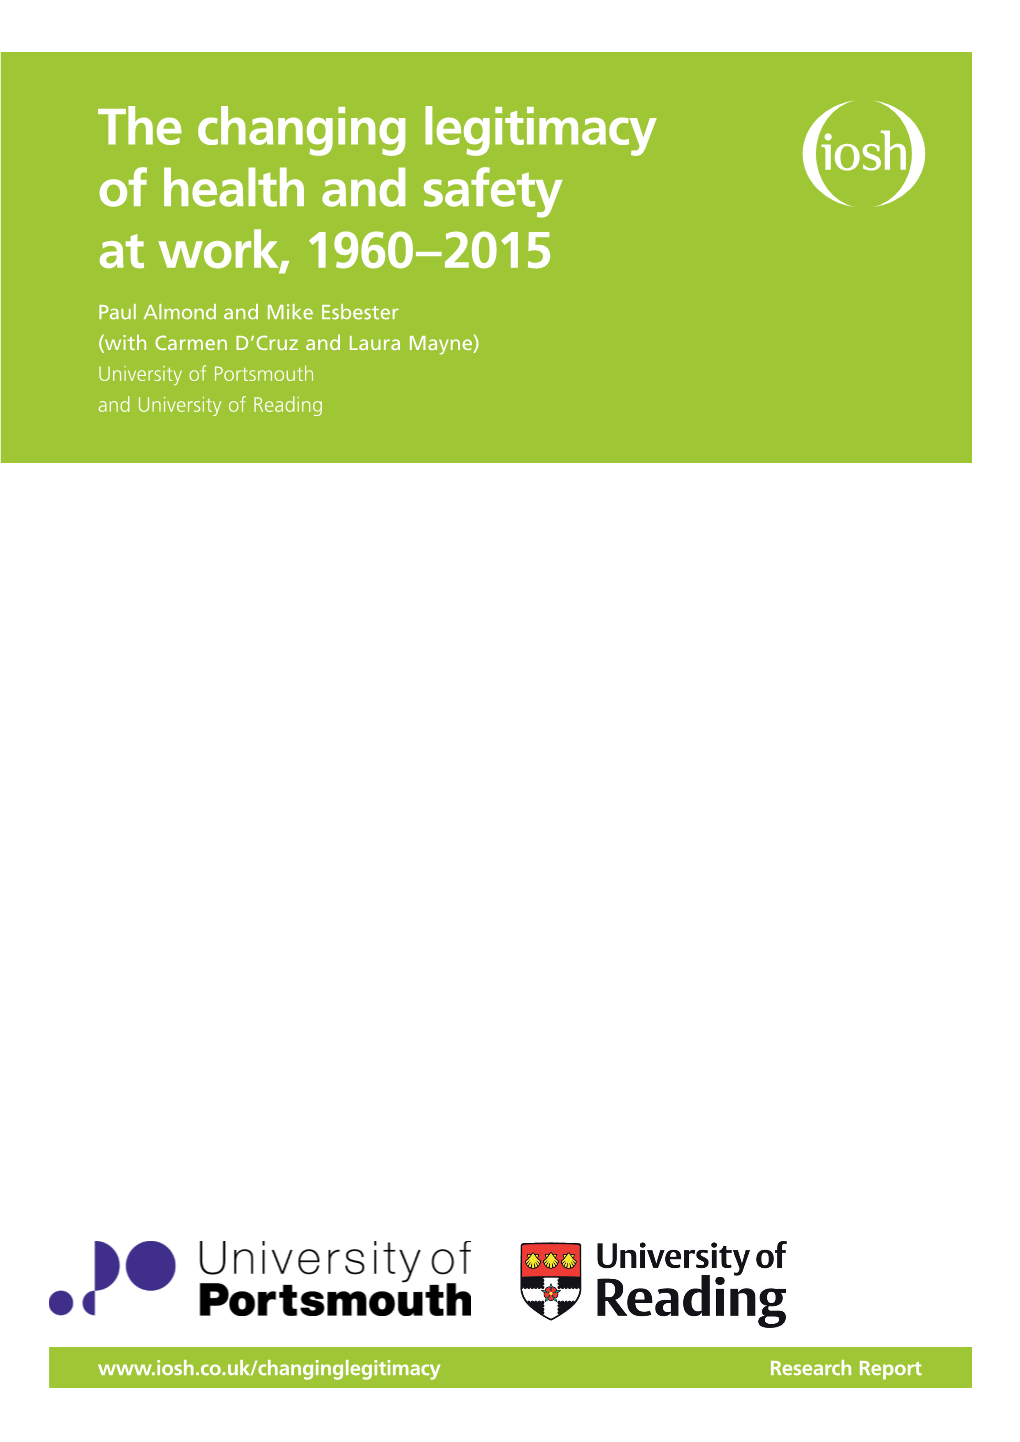 The Changing Legitimacy of Health and Safety at Work, 1960-2015